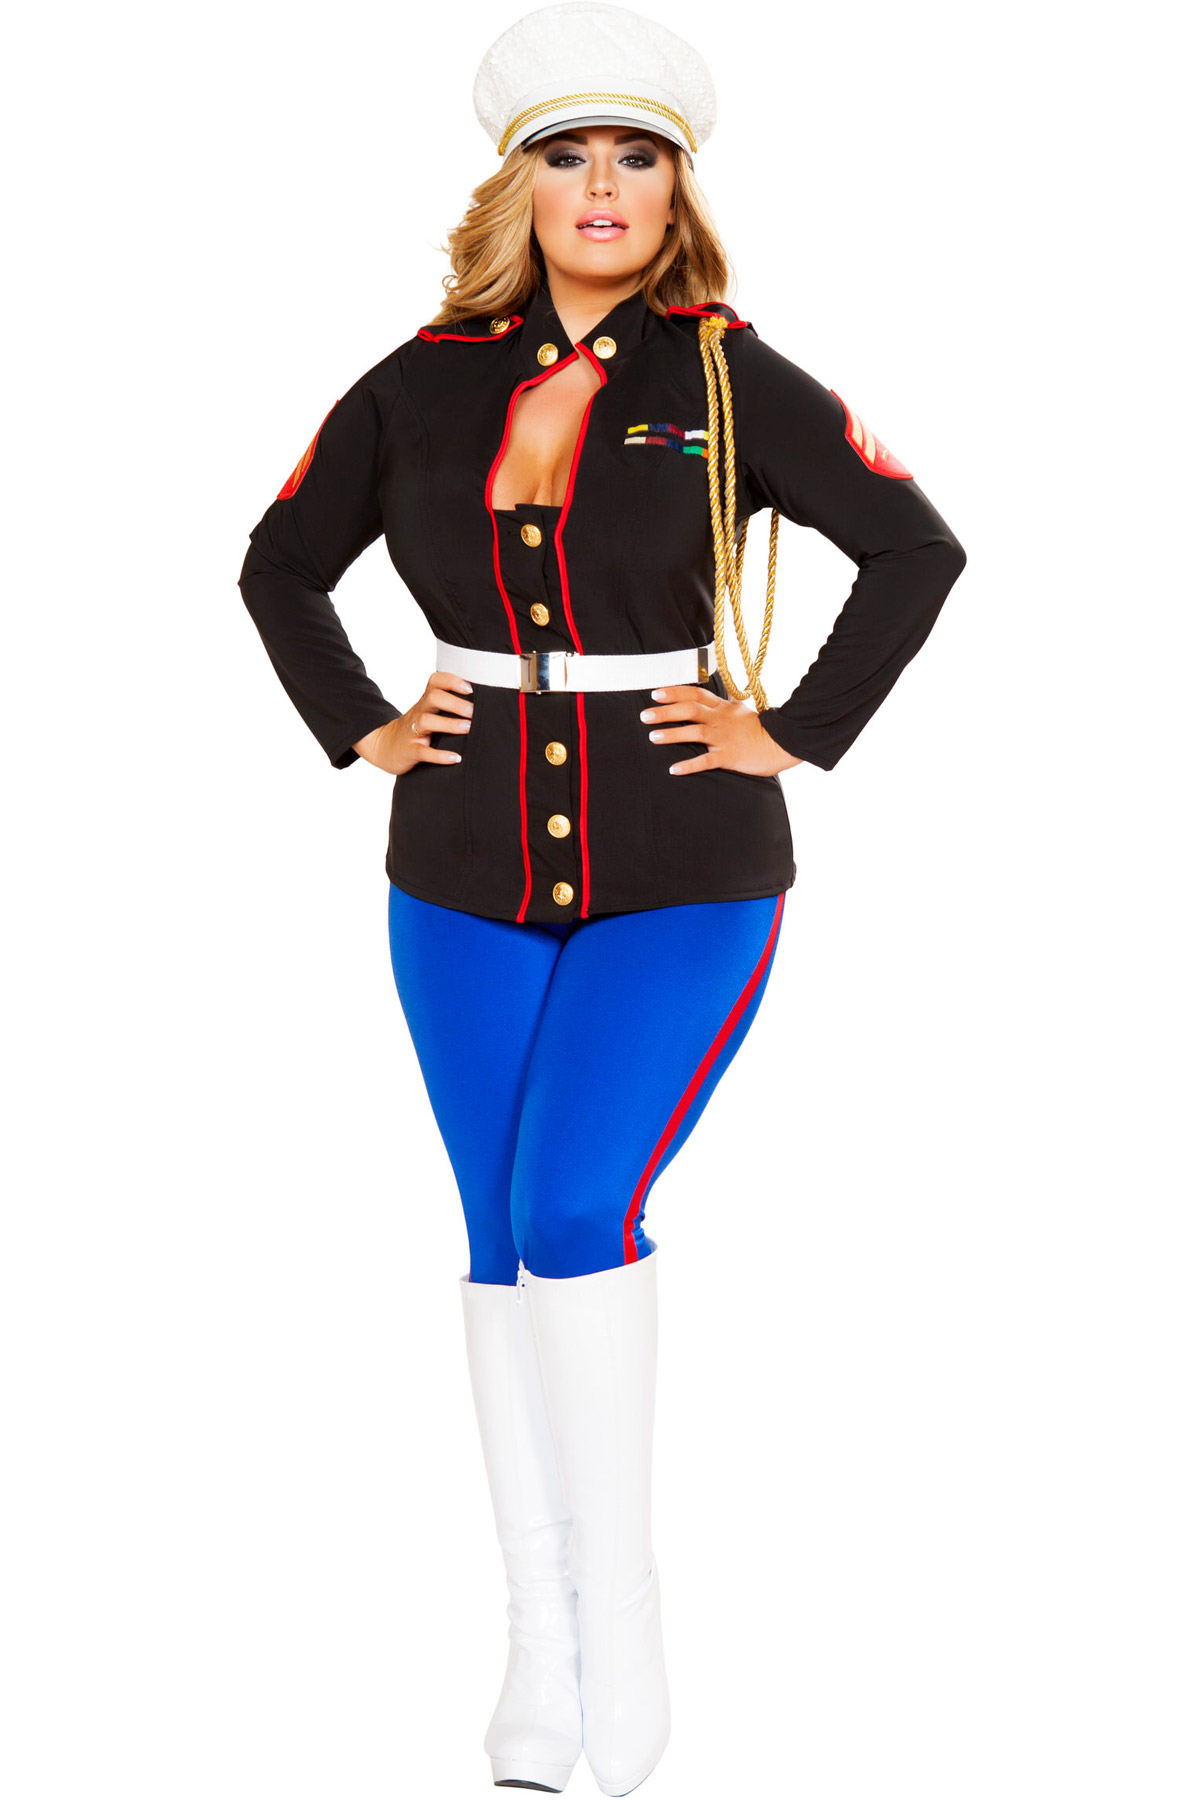 thumbnail 4 - Sexy Marine Corporal Adult Women Military Costume Braded Aiguillette Jacket Pant